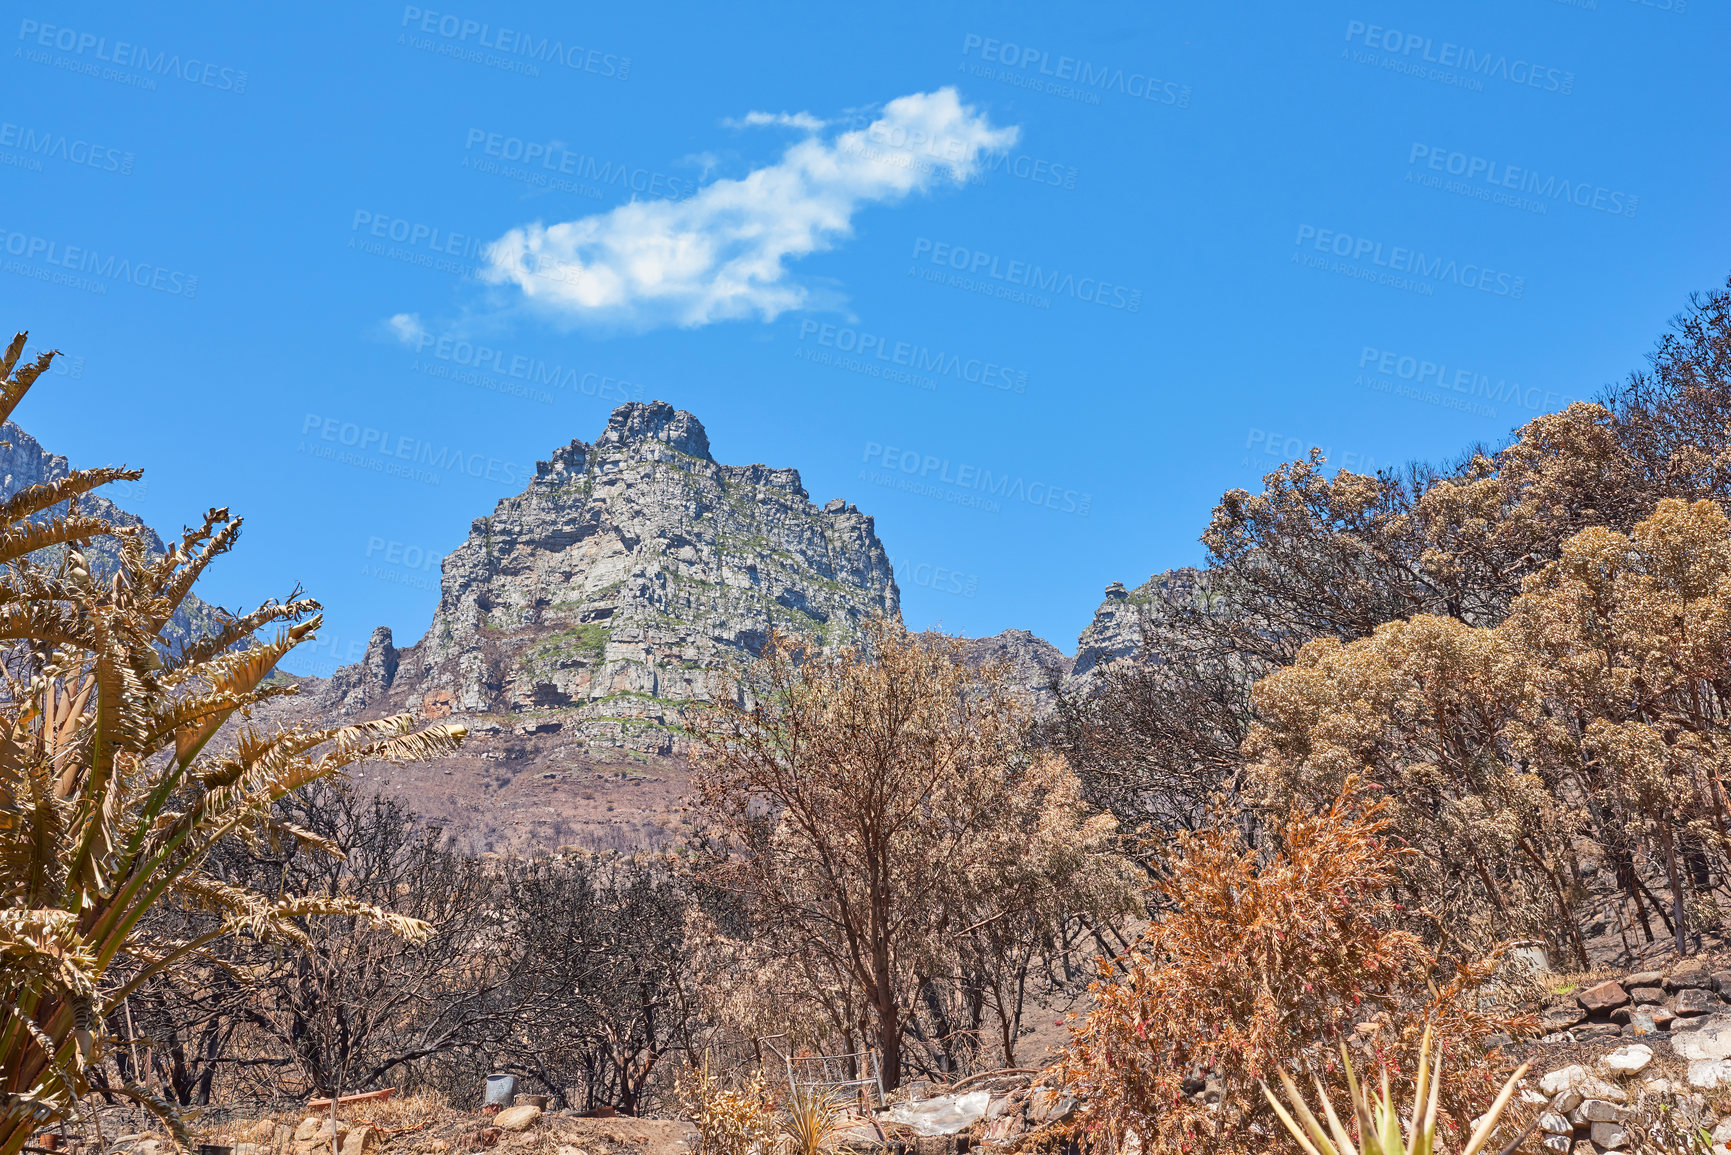 Buy stock photo Landscape view of twelve apostles in Cape Town, Western Cape in South Africa. The scenery of a popular tourist attraction for hiking and natural landmark during the day against a cloudy blue sky